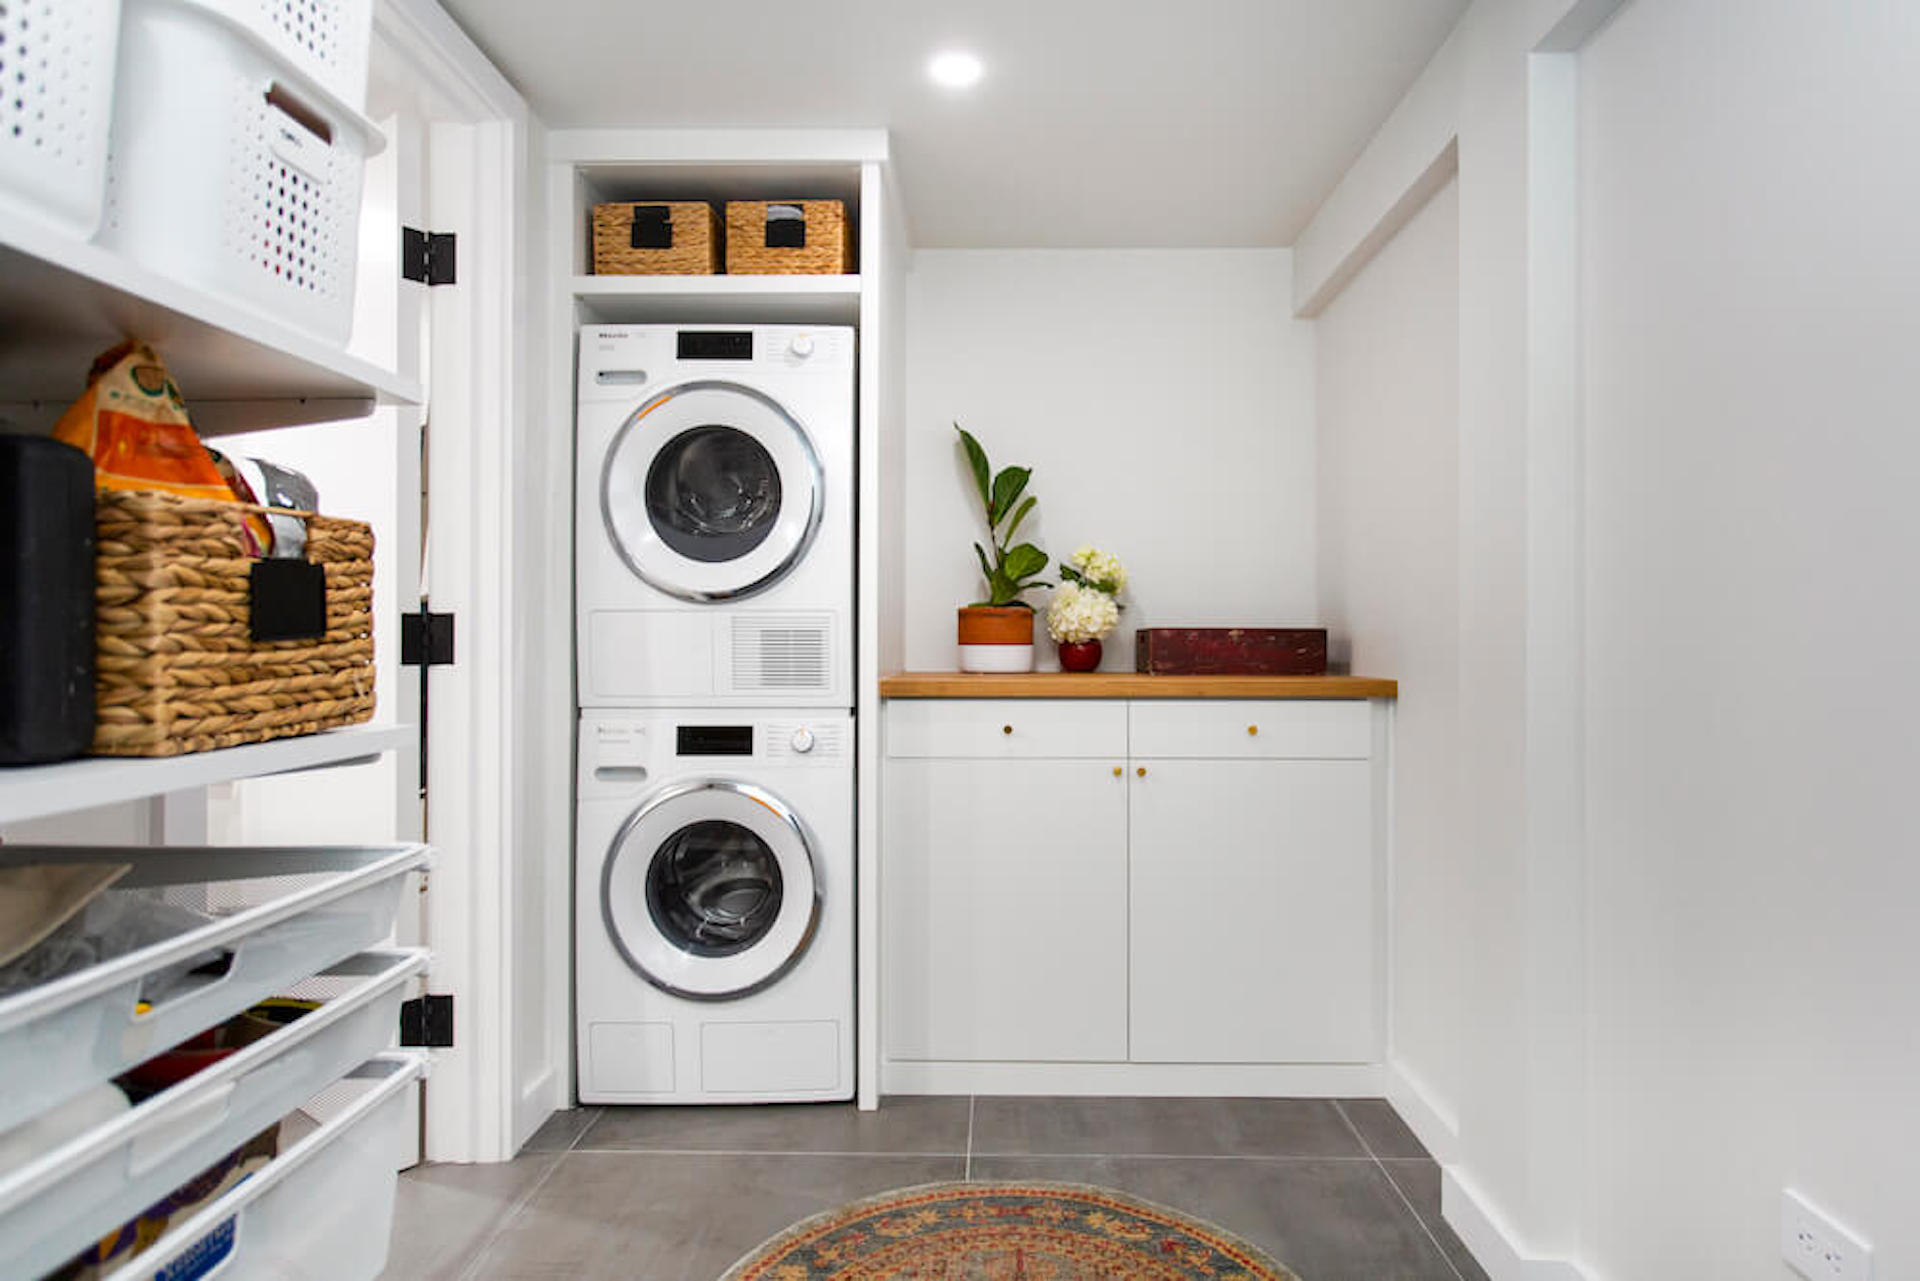 How To Set Up Laundry Room Plumbing For A Washing Machine